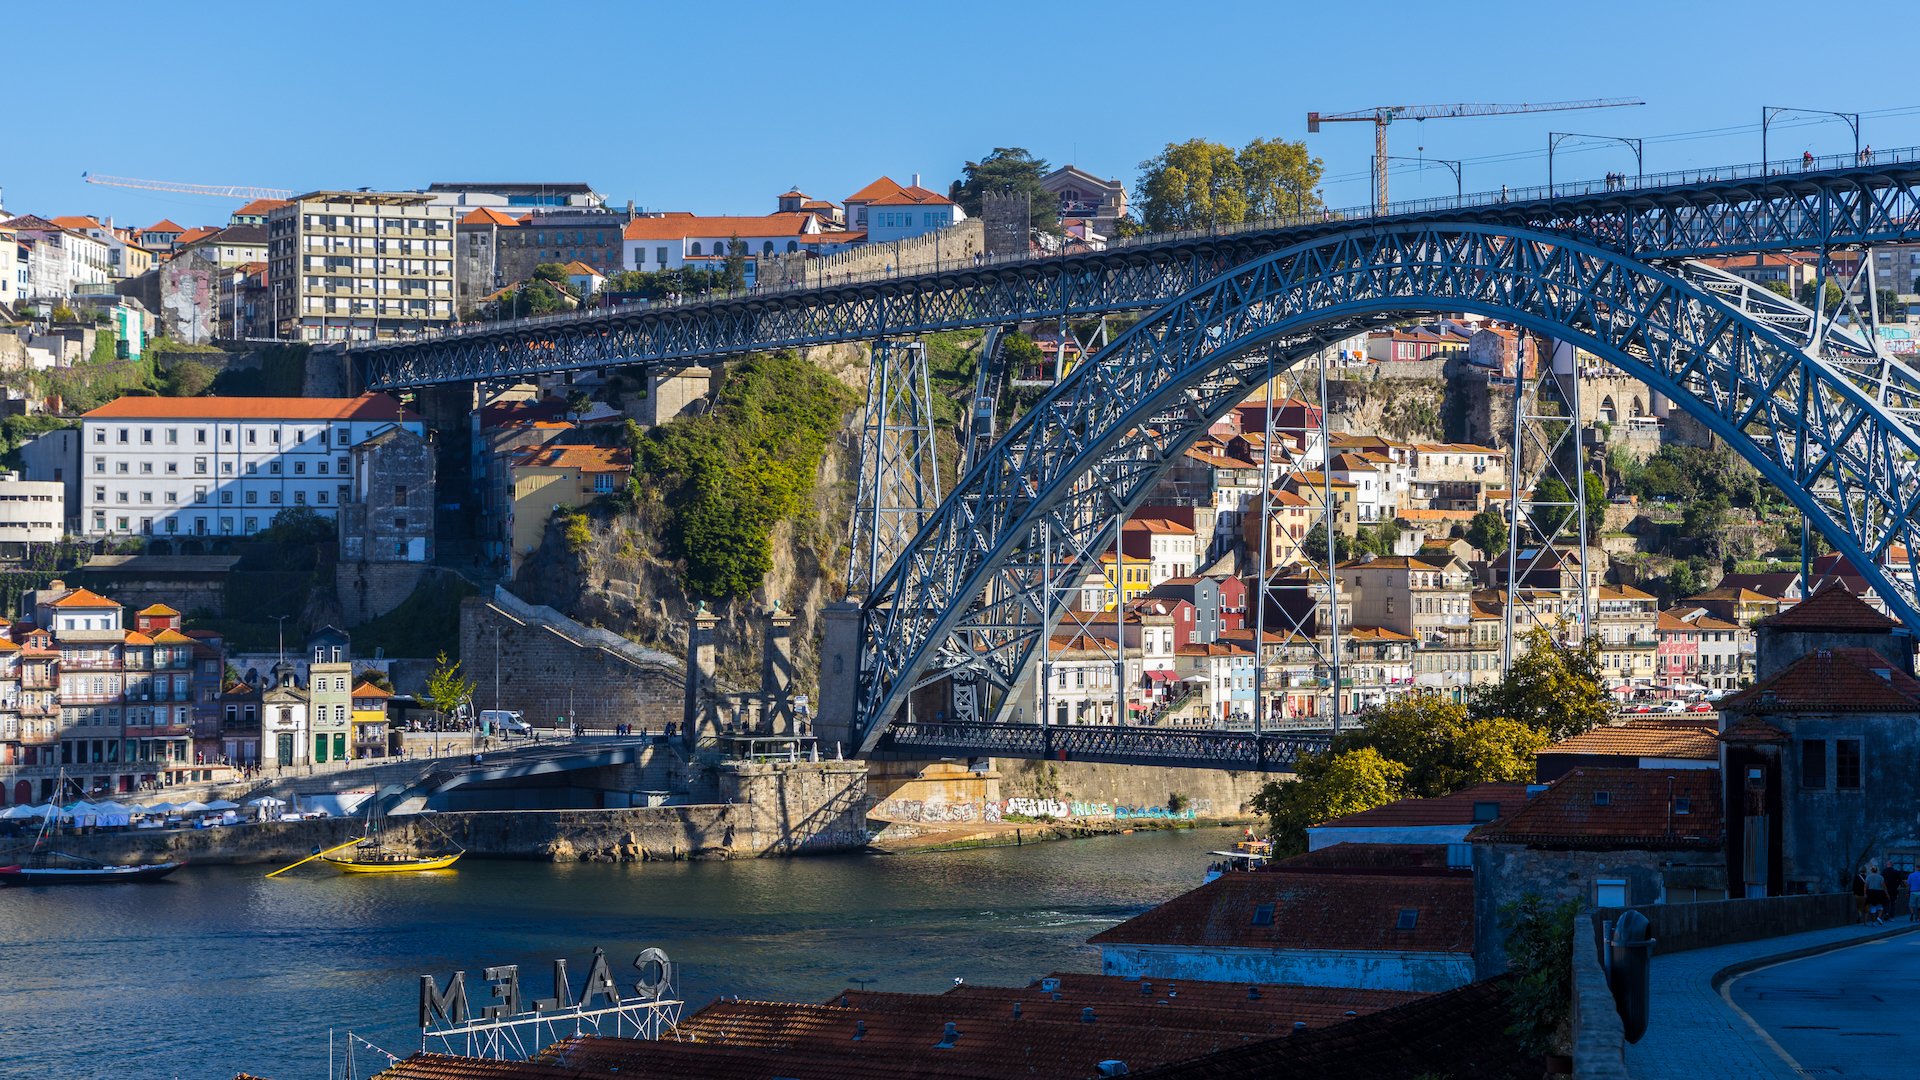  The Dom Luís I Bridge, a double-deck metal arch bridge that spans the River Douro between the cities of Porto and Vila Nova de Gaia in Portugal. At its construction, its 172 metres (564 ft) span was the longest of its type in the world. 